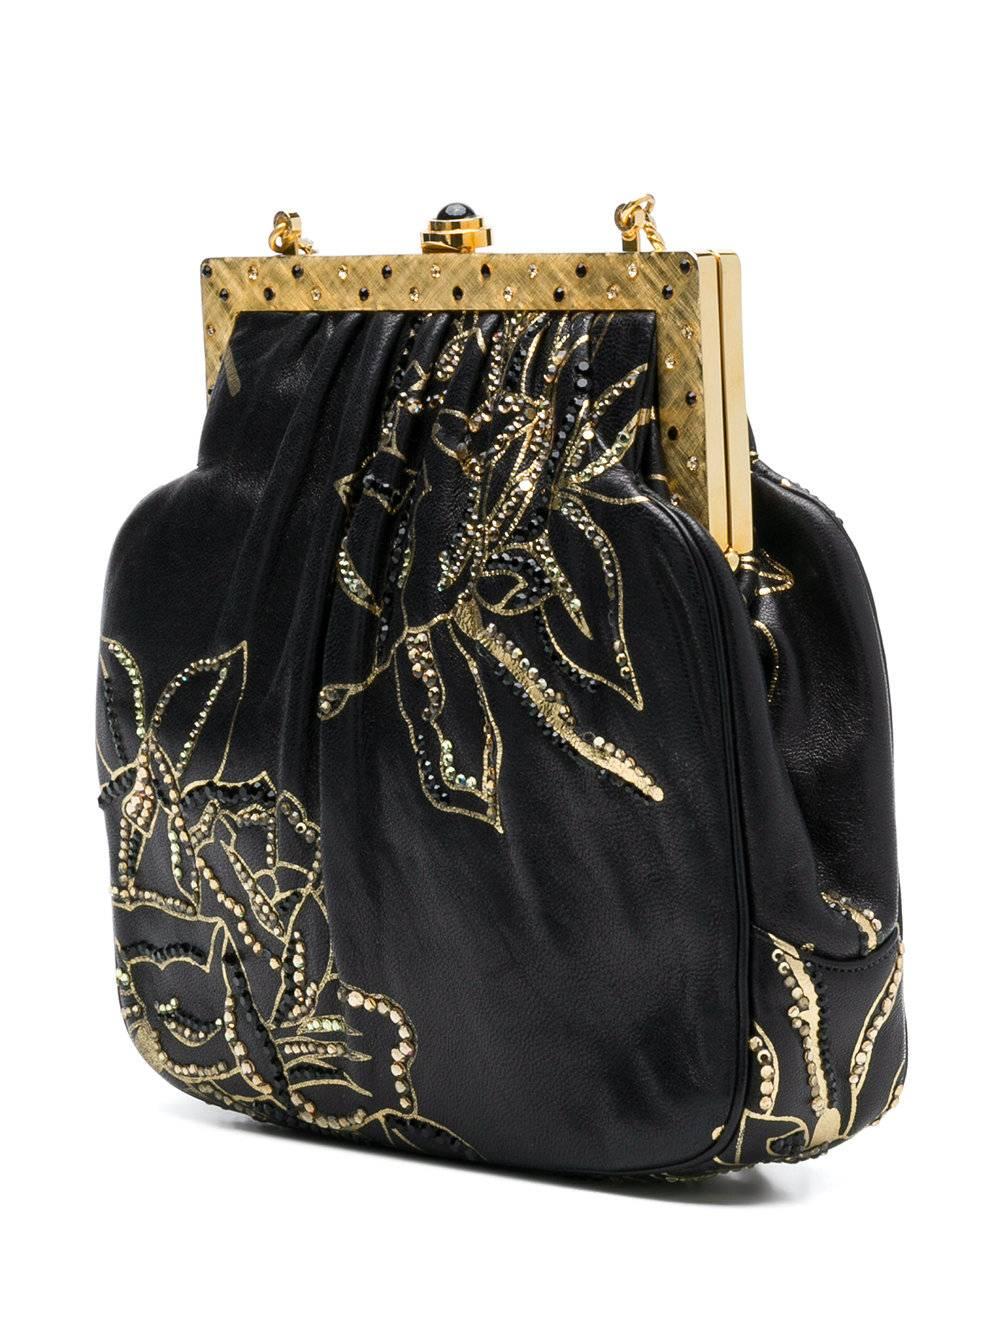 This evening bag from the iconic Judith Leiber is finished with the accents of crystal so inherent to her glittering world. This leather-bodied bag is hand-painted with metallic flowers and framed with brushed gold-tone hardware. Leiber's magical